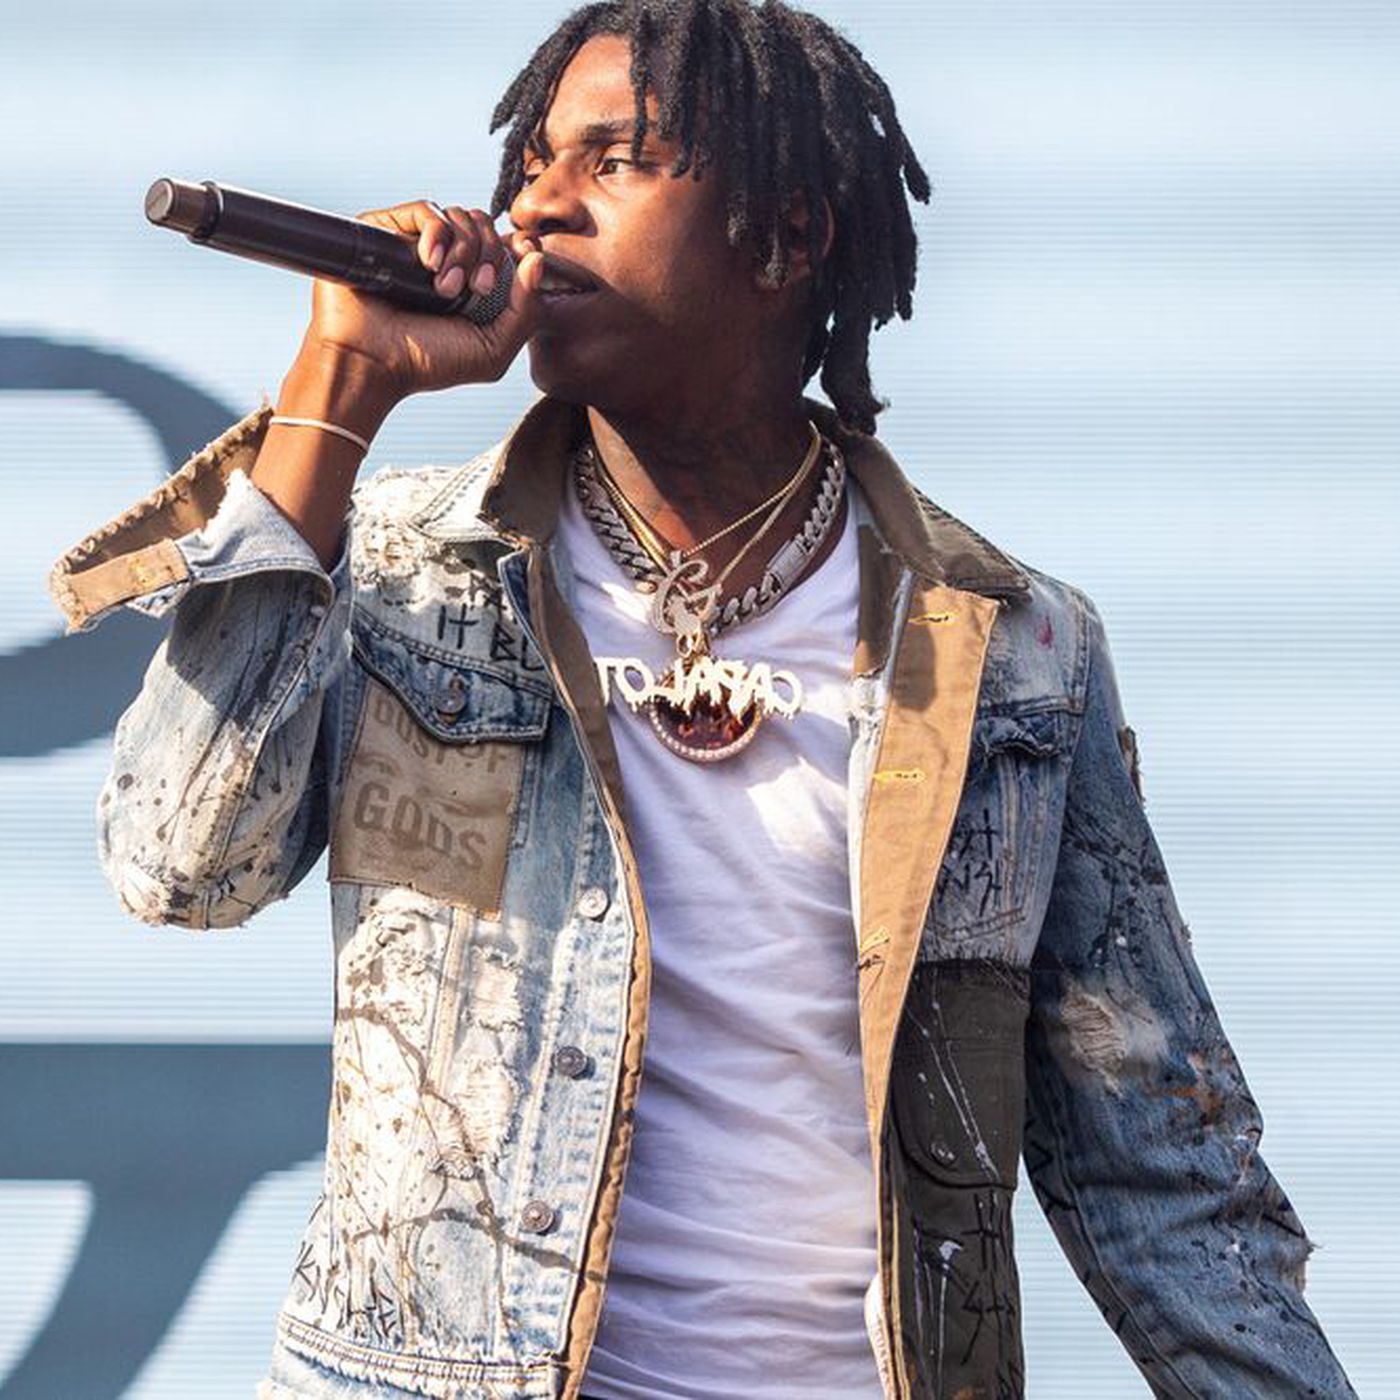 Polo G announces 'The Goat' album and reveals release date